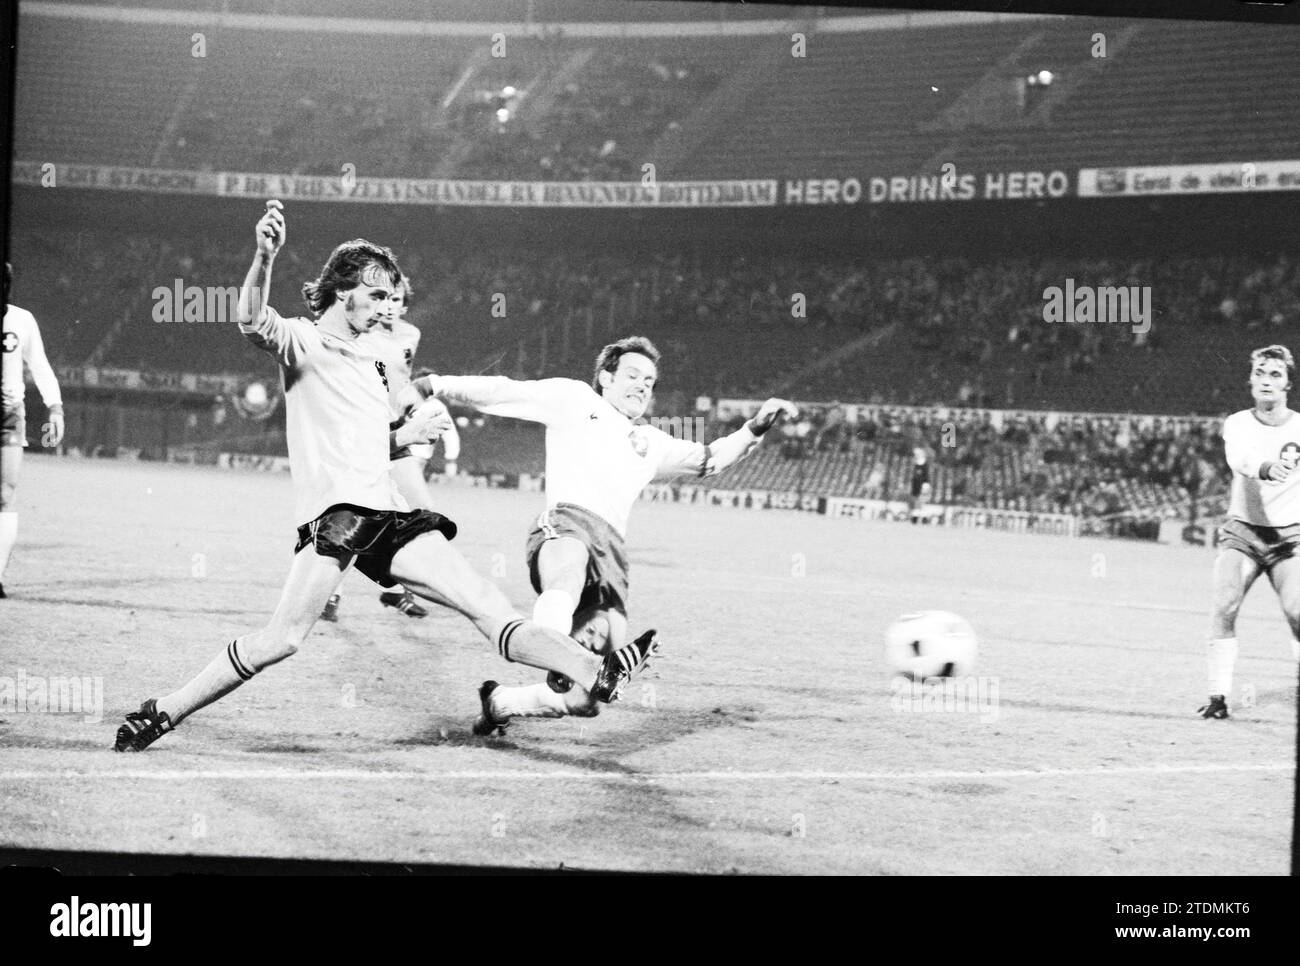 Netherlands - Switzerland, Football Netherlands, 09-10-1974, Whizgle News from the Past, Tailored for the Future. Explore historical narratives, Dutch The Netherlands agency image with a modern perspective, bridging the gap between yesterday's events and tomorrow's insights. A timeless journey shaping the stories that shape our future Stock Photo